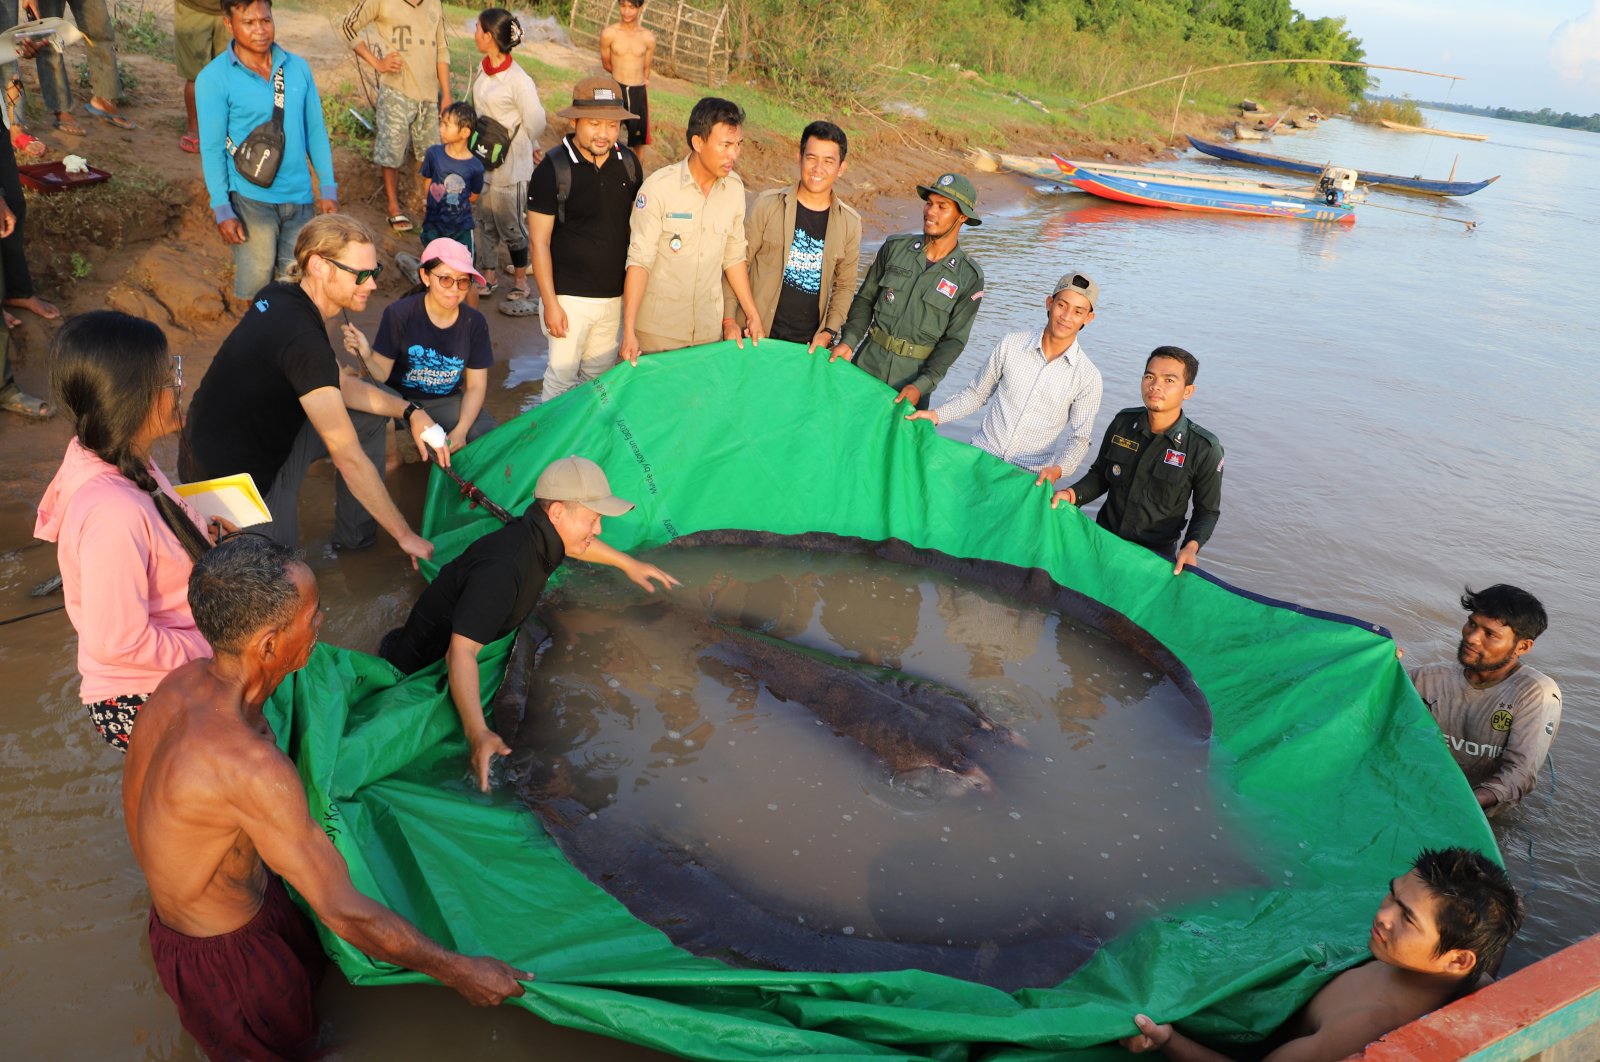 In this photo provided by Wonders of the Mekong taken on June 14, 2022, a team of Cambodian and American scientists and researchers, along with Fisheries Administration officials  prepare to release a giant freshwater stingray back into the Mekong River in the northeastern province of Stung Treng, Cambodia. (Chhut Chheana/Wonders of the Mekong via AP)